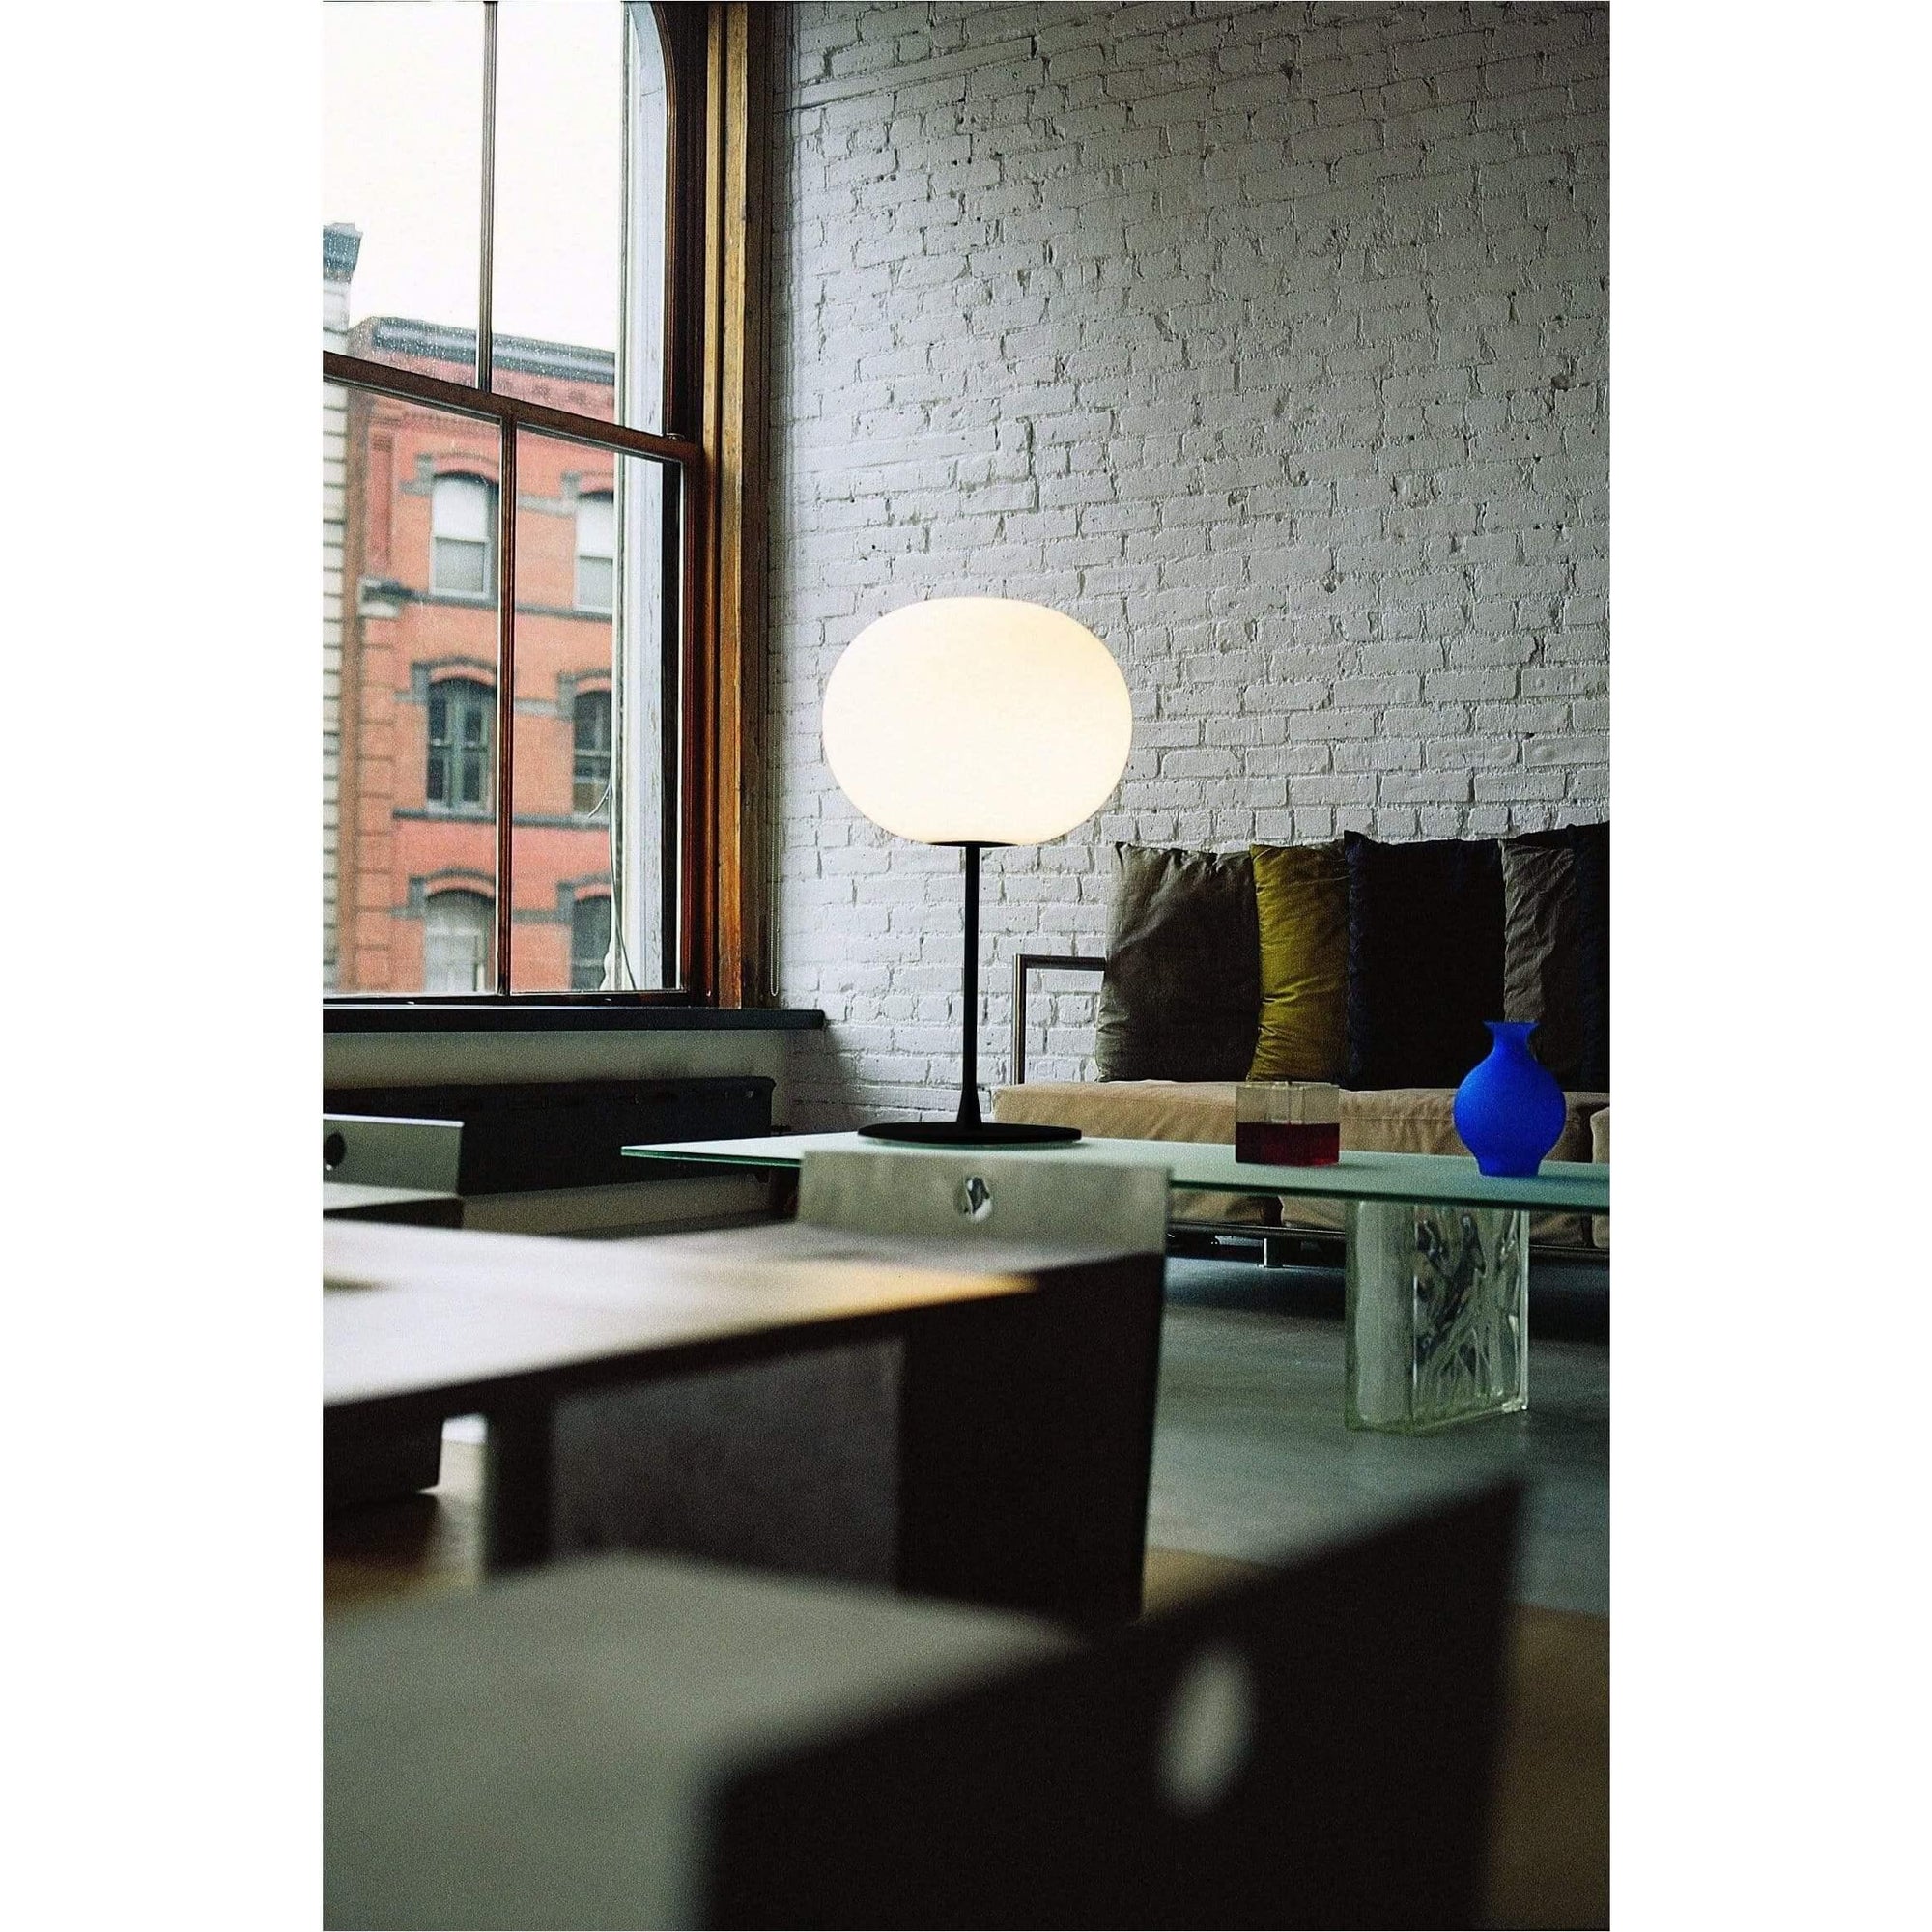 Glo-Ball T - Curated - Lighting - Flos